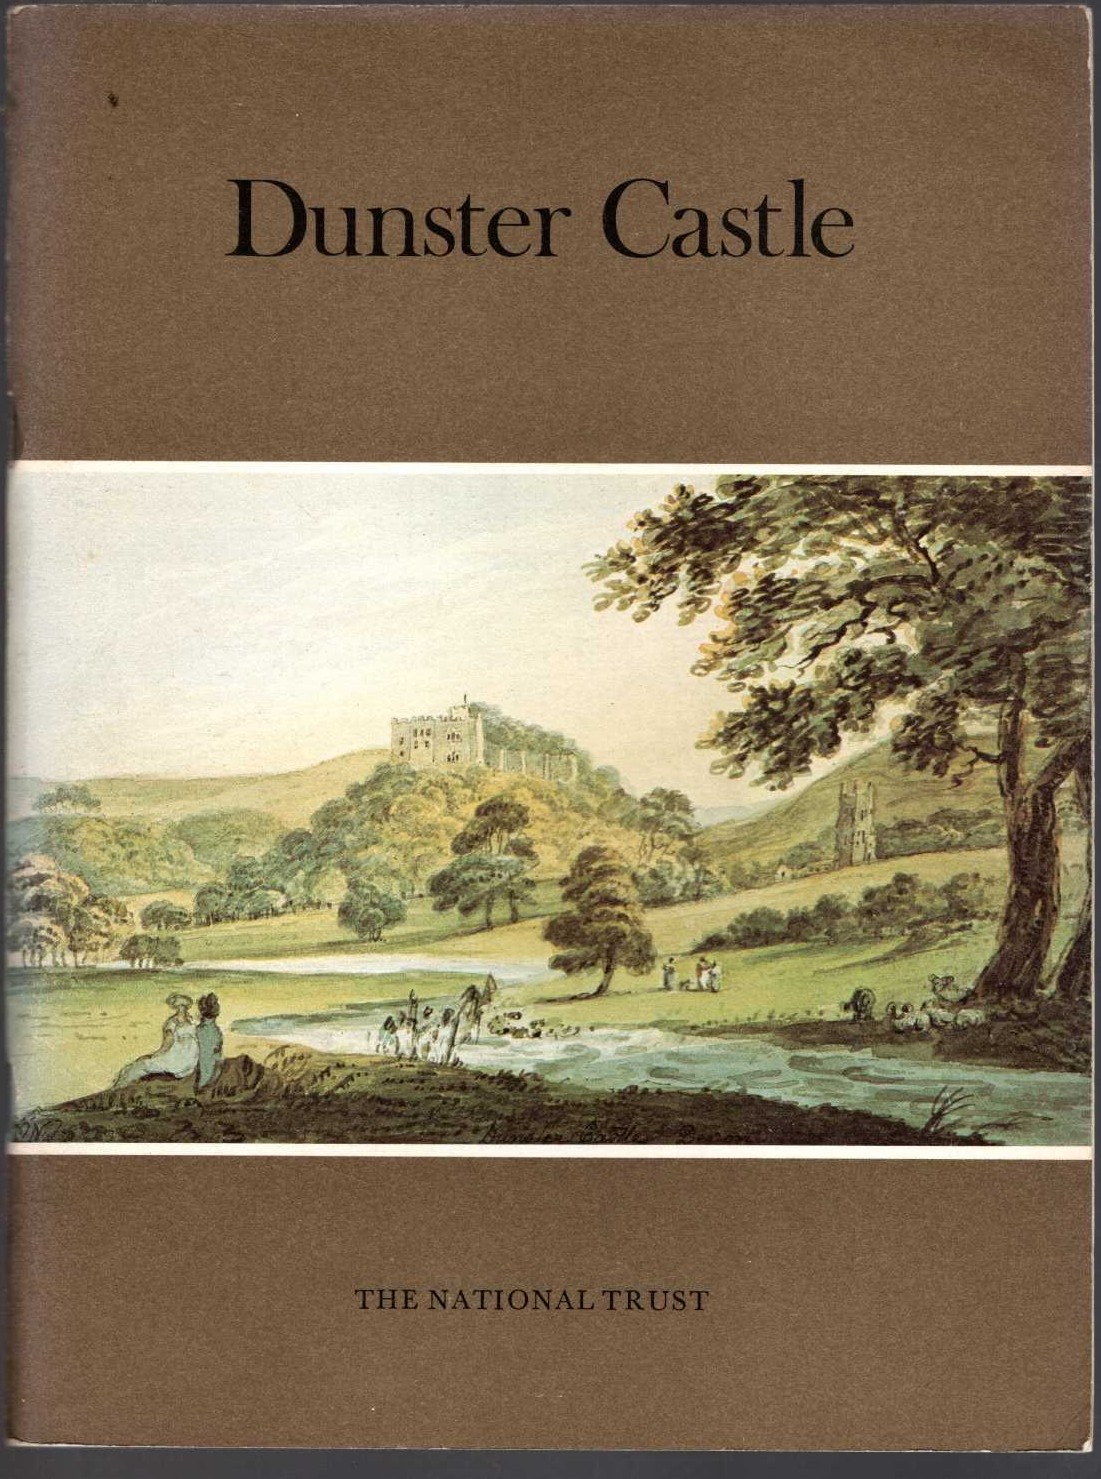 
\ DUNSTER CASTLE by The National Trust front book cover image